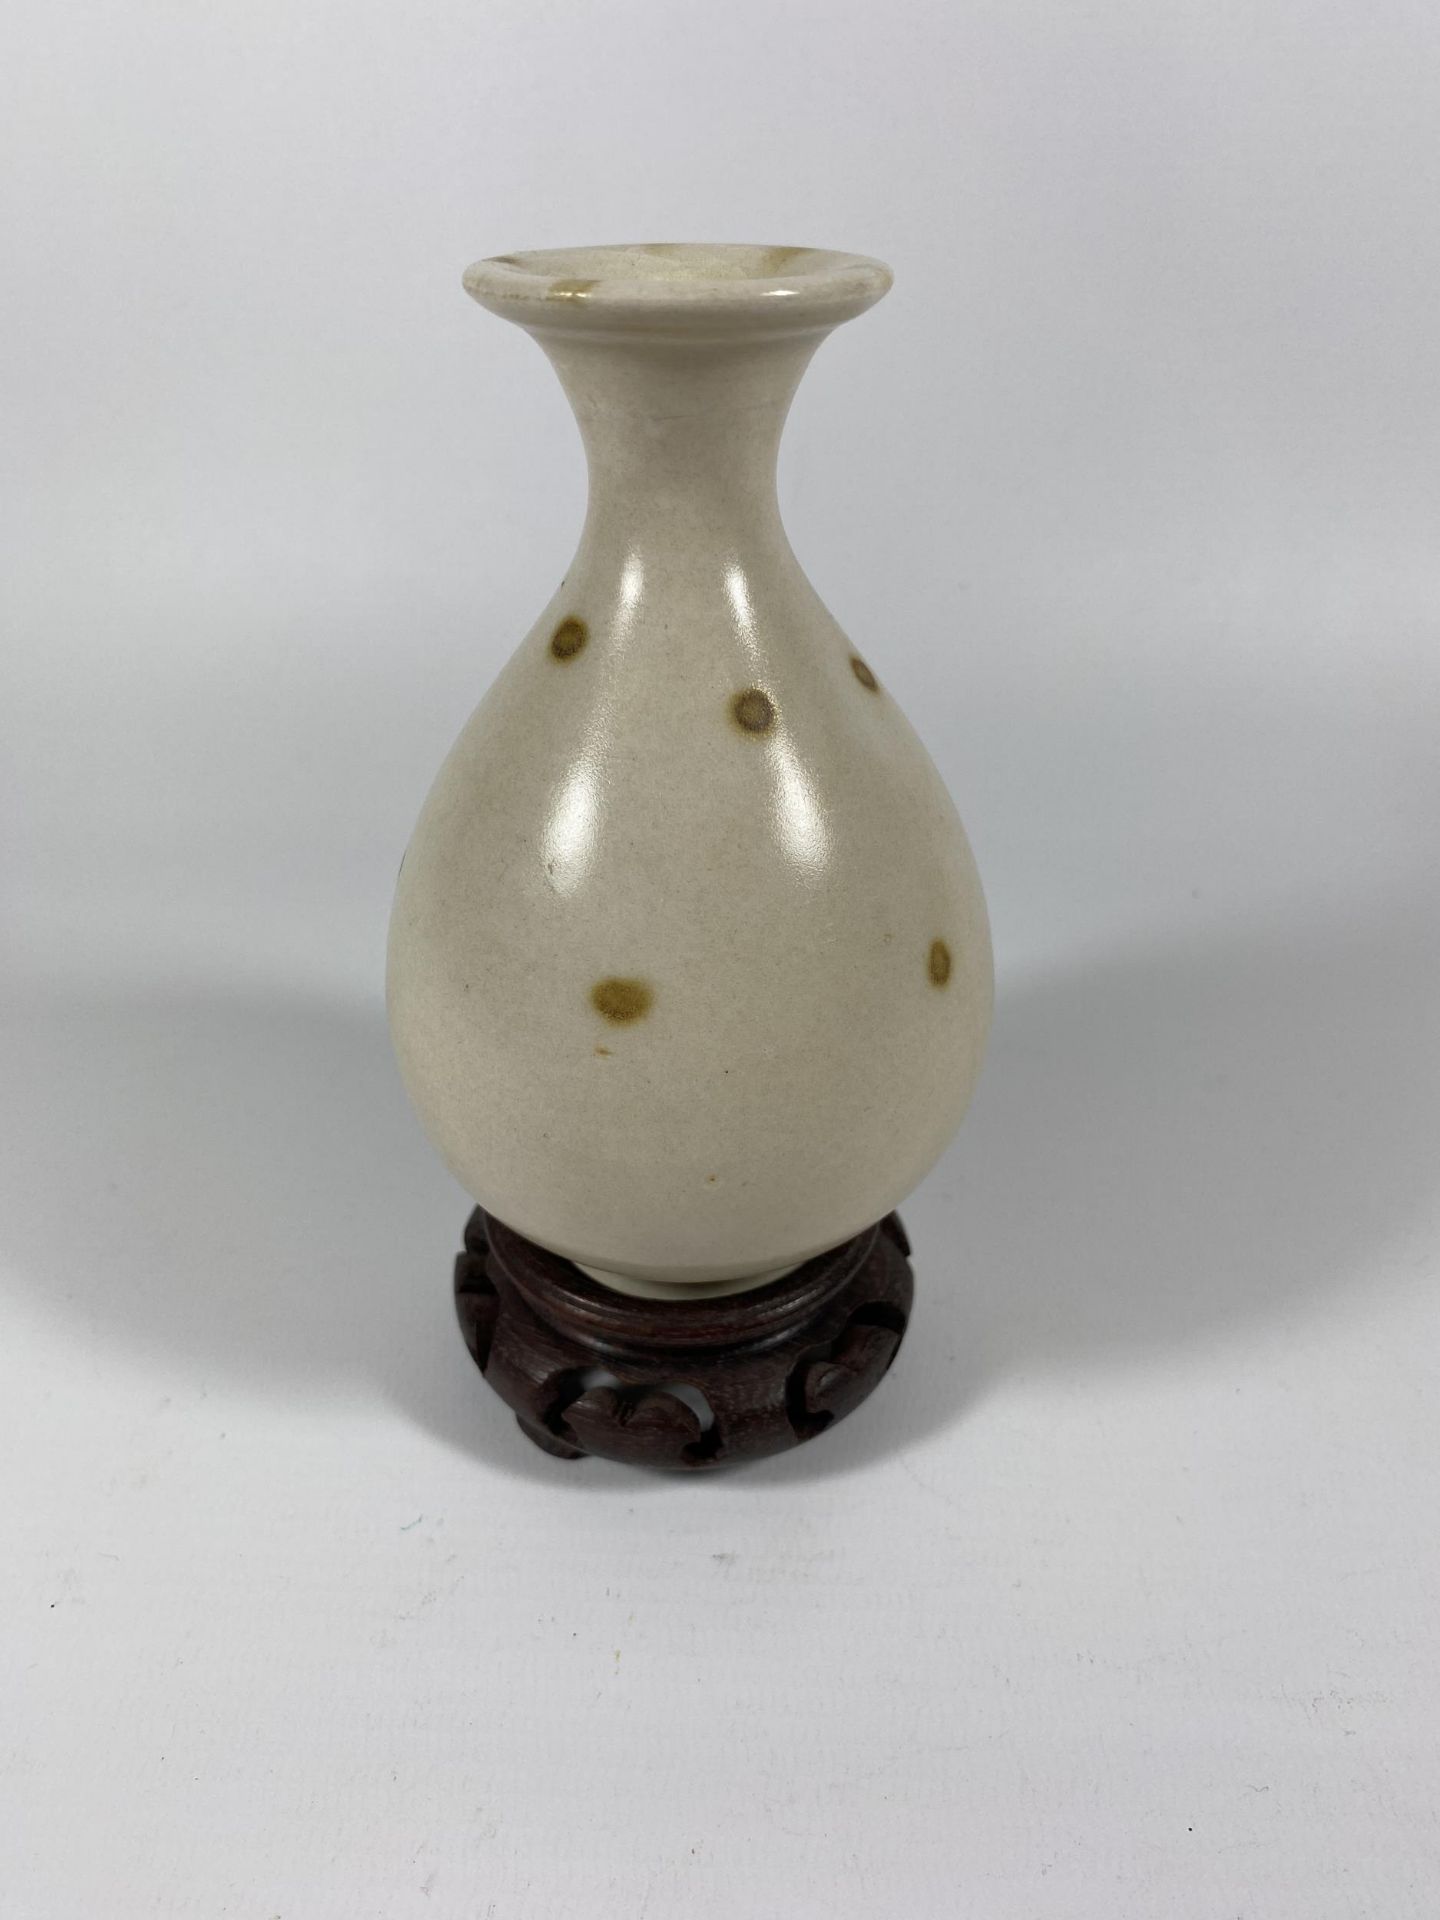 A CHINESE PORCELAIN BOTTLE VASE ON CARVED WOODEN STAND, HEIGHT OF VASE 13CM